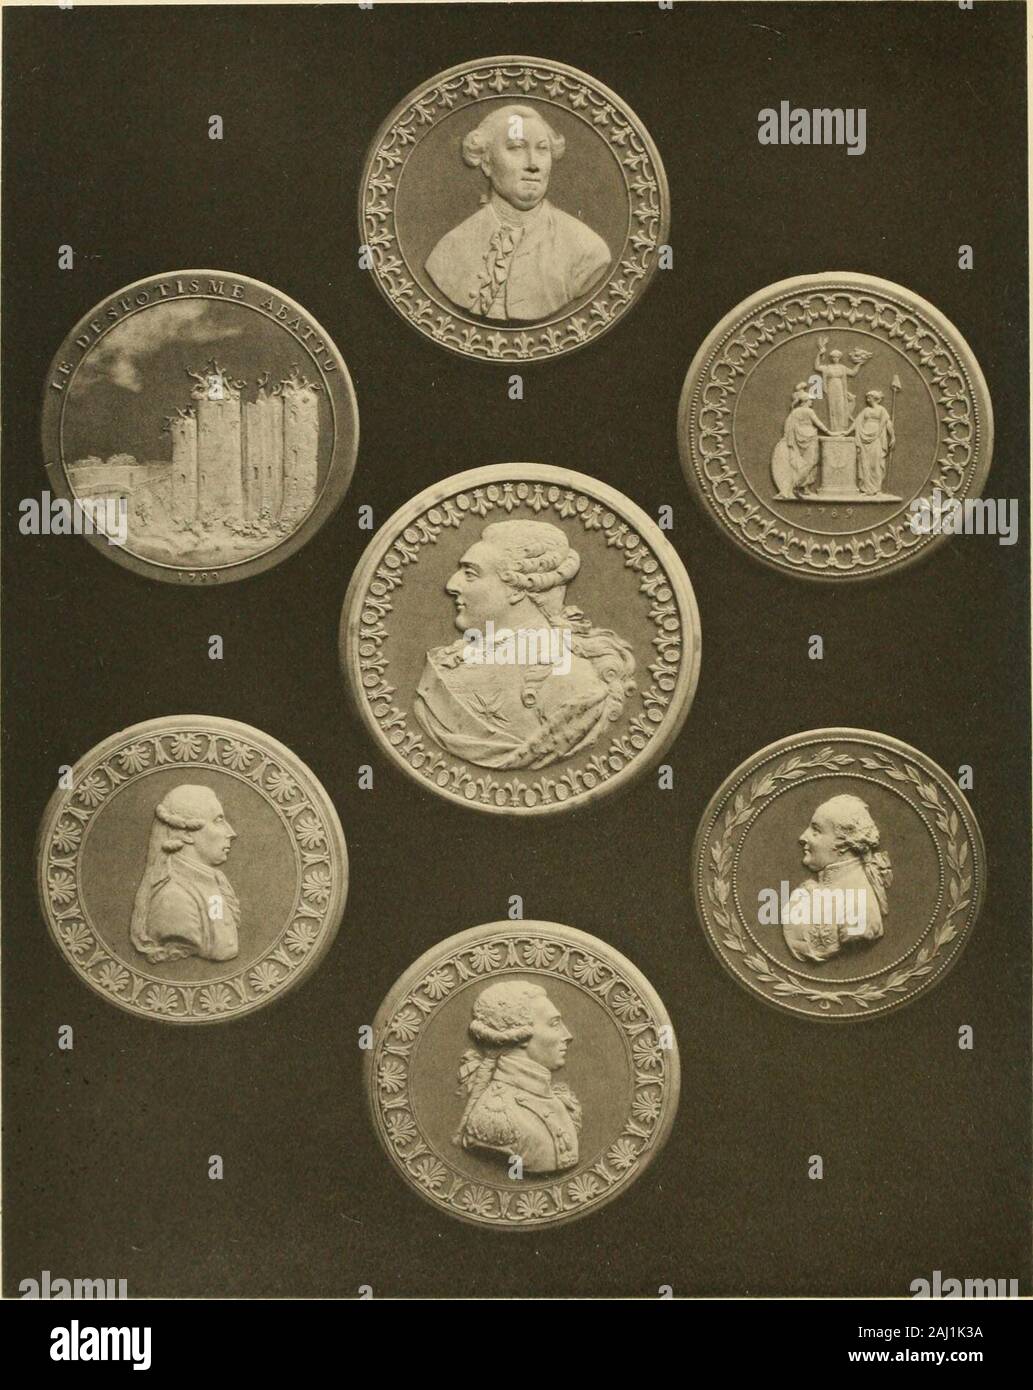 Catalogue of mediæval & later antiquities contained in the Mayer Museum, including the Mather collection of miniatures and medals relating to the Bonaparte family . ^in. 20. i. 70. 173 623. Medal, same as No. 593.Obv. Same as No. 594. Rev. das BEFREIETE MAGDEBURG UBERGEBENAN TAUENZIEN D. 23 MAI 1814. The delivered Magdeburg givenover to Tauenzien. Dia. |in. 20. I. 70. 173 624! Medal, same as No. 593.Obv. same as No. 594. Rev. und SCHENKTE EUROPA RUHE UND GLUCKDURCH DEN PARISER FRIEDEN D. 30 MAI 1814. And gave to Eu-rope rest and happiness by thepeace of Paris. Dia. |in. 20. I. 70. 174 625. Med Stock Photo